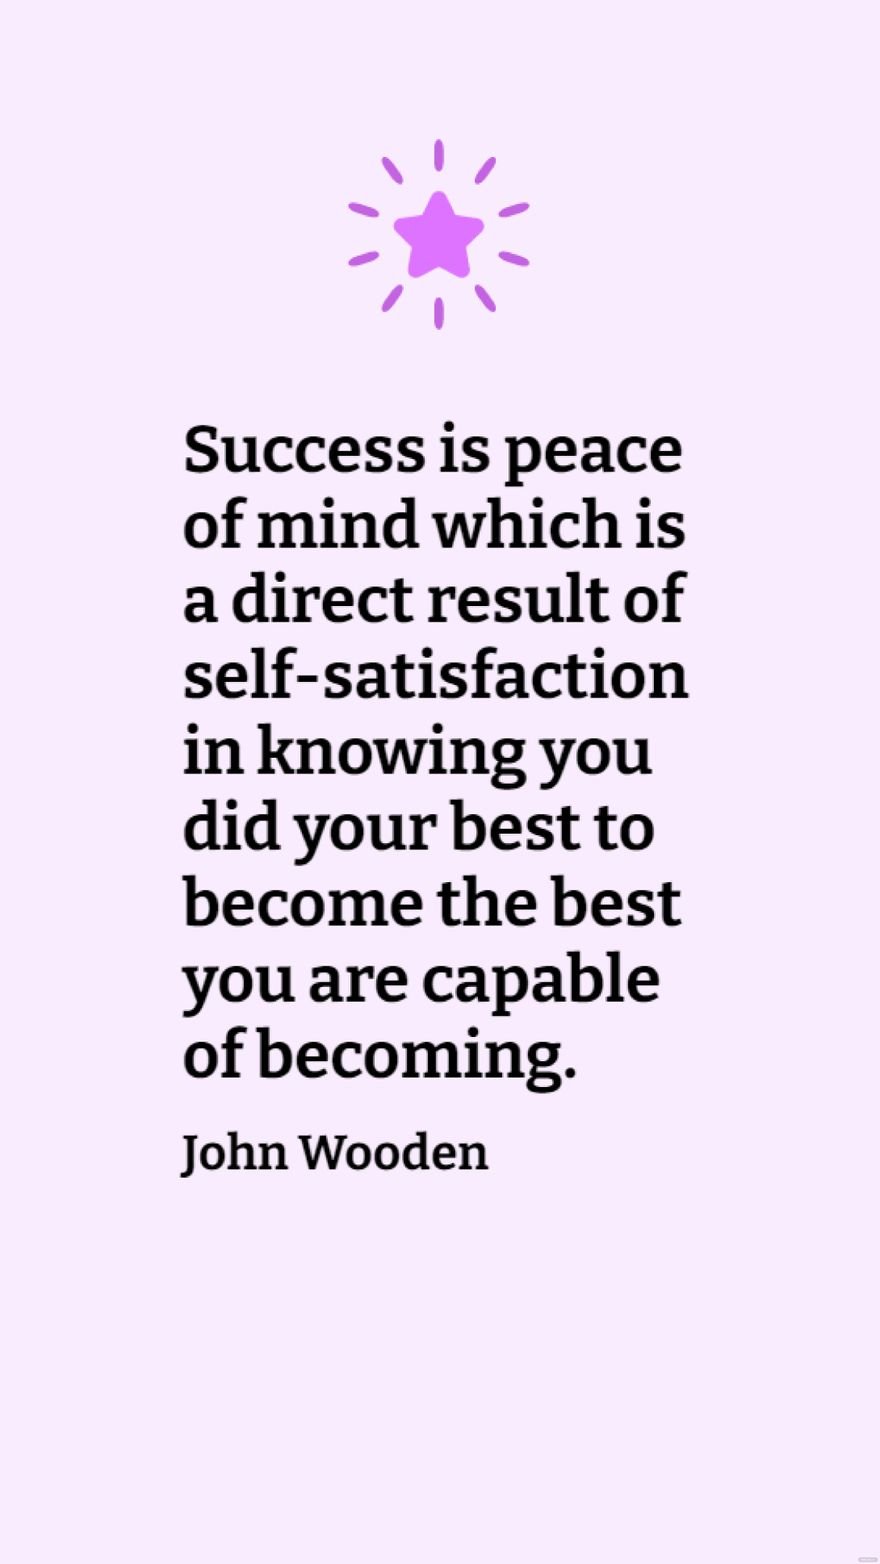 John Wooden - Success is peace of mind which is a direct result of self-satisfaction in knowing you did your best to become the best you are capable of becoming.